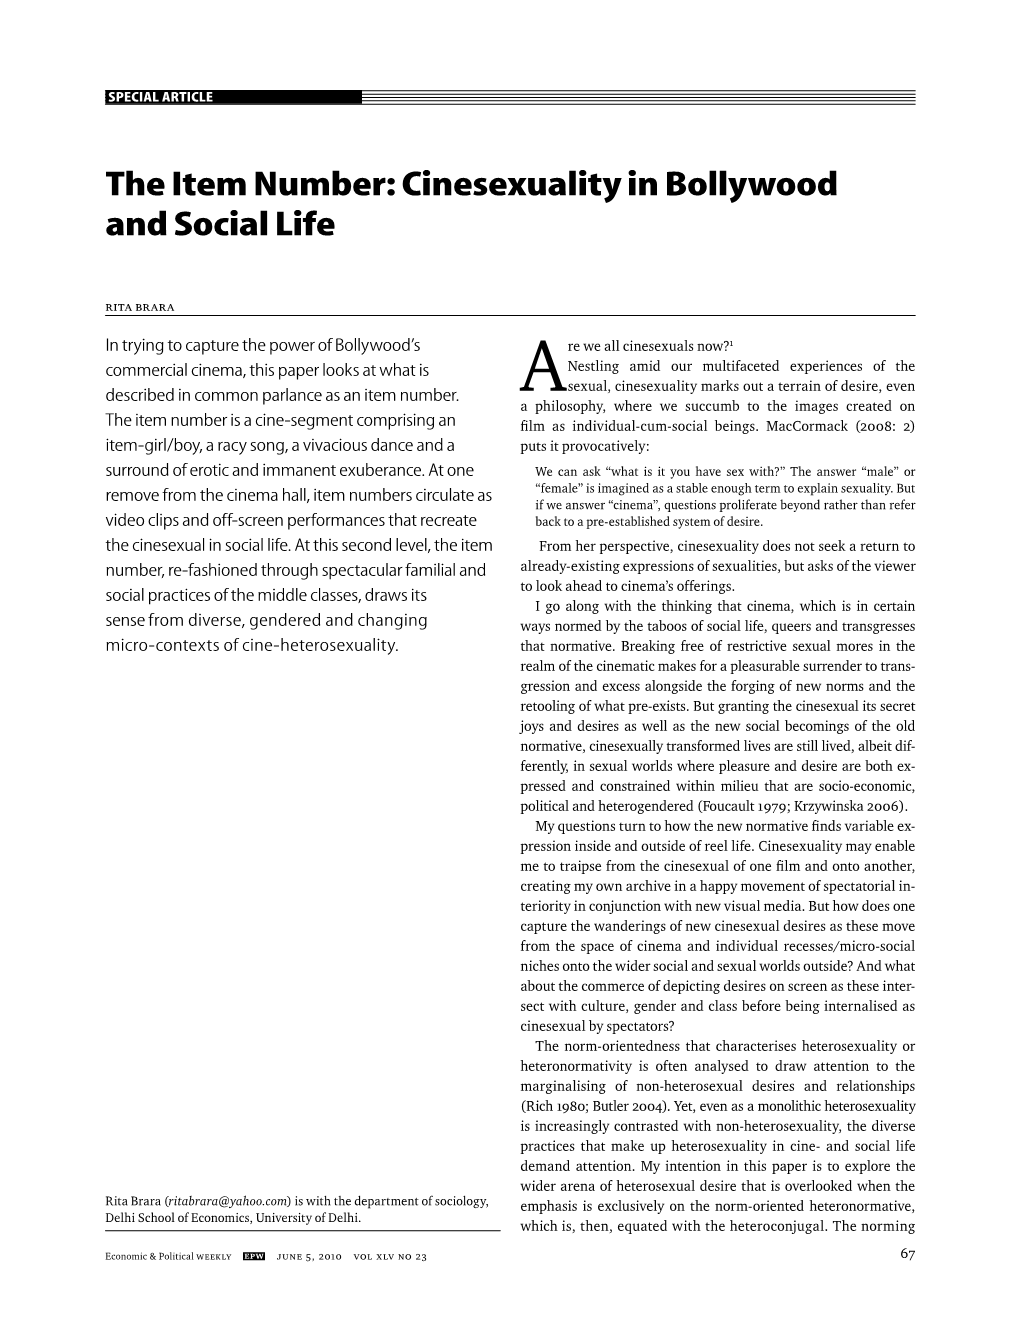 The Item Number: Cinesexuality in Bollywood and Social Life